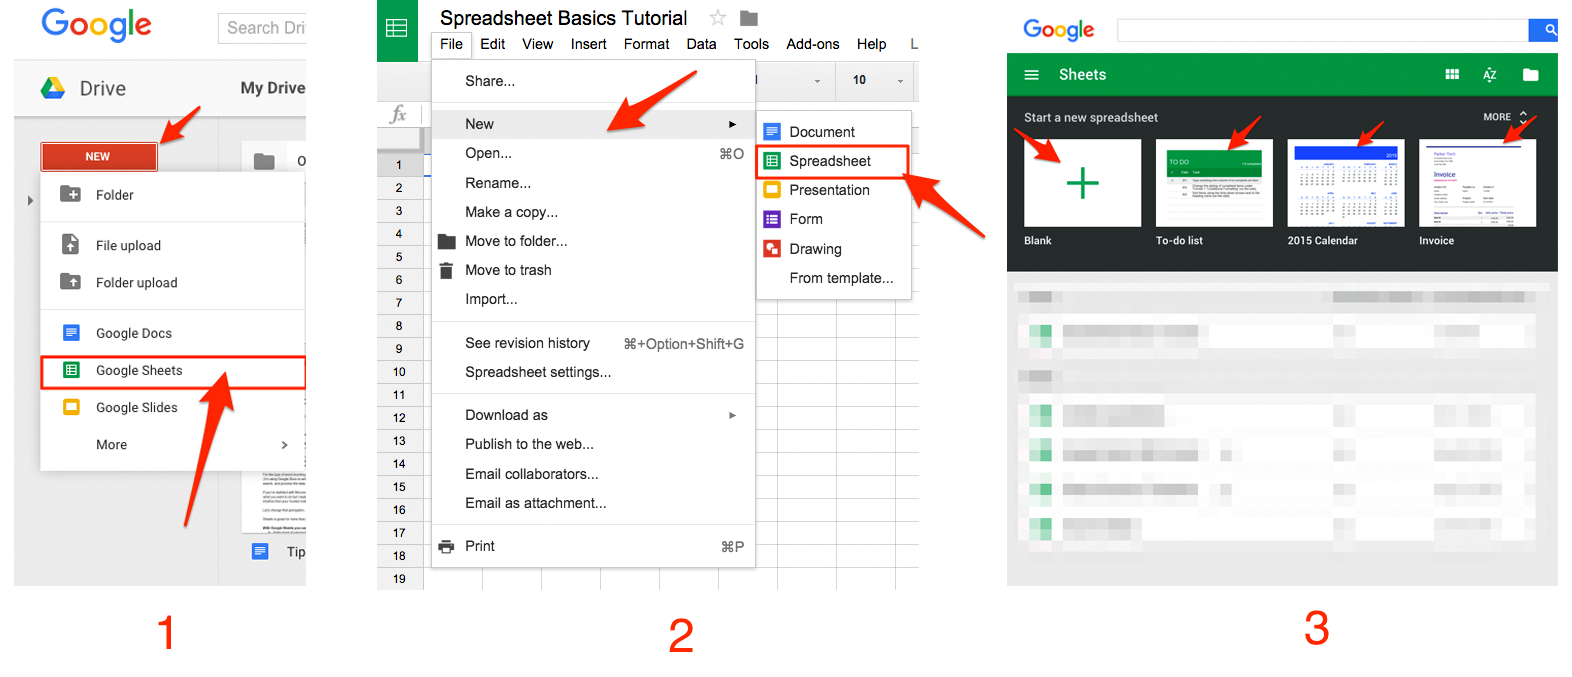 Create A Spreadsheet Online Free In Google Sheets 101: The Beginner's Guide To Online Spreadsheets  The